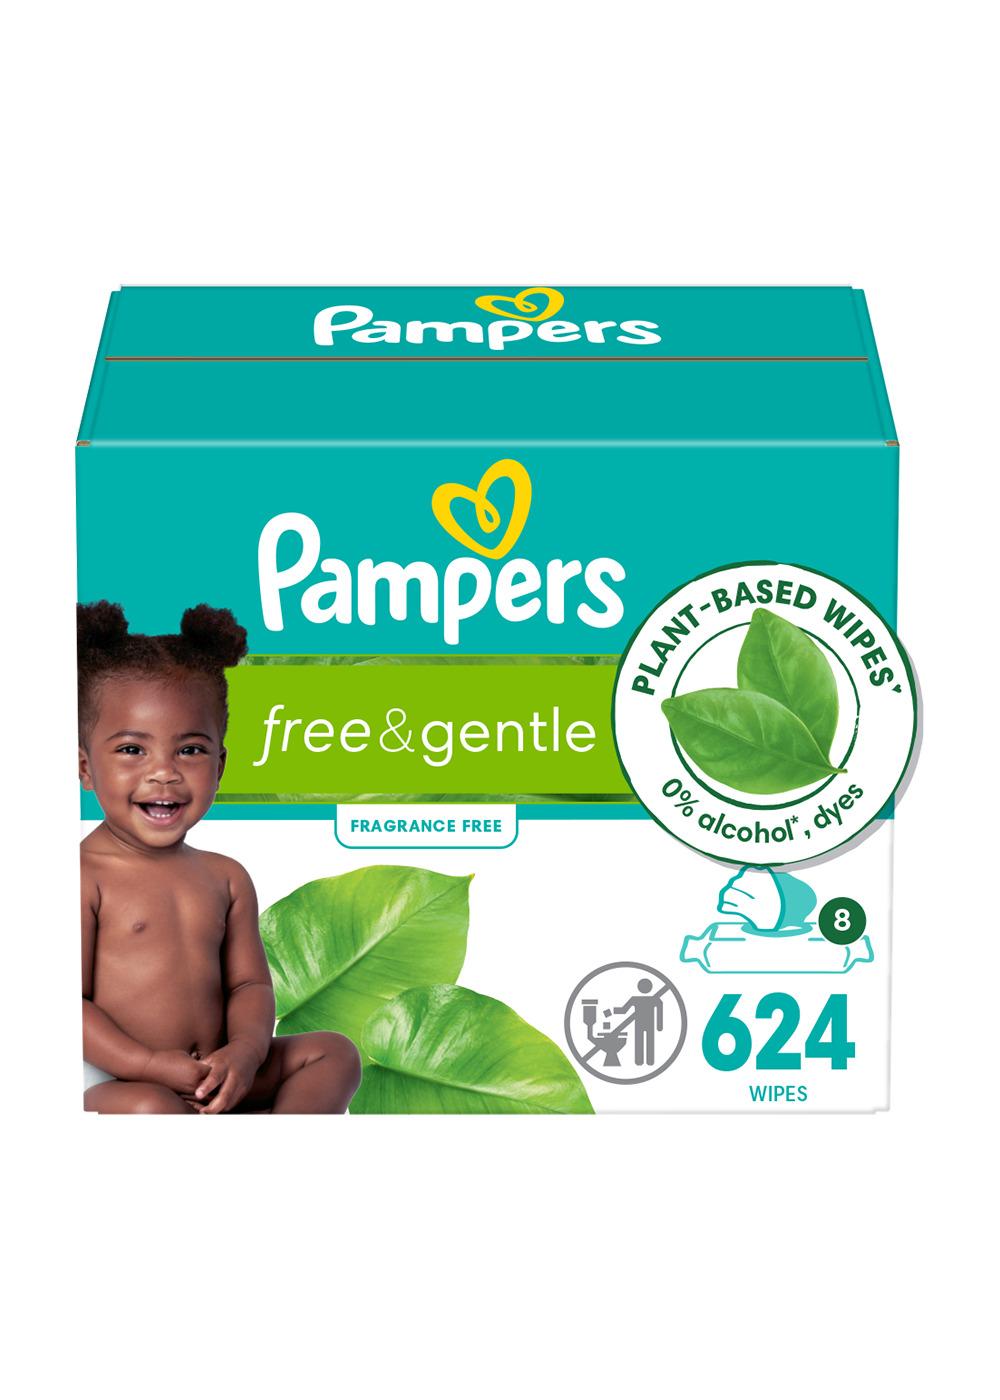 Pampers Free & Gentle Baby Wipes 8 pk; image 1 of 10